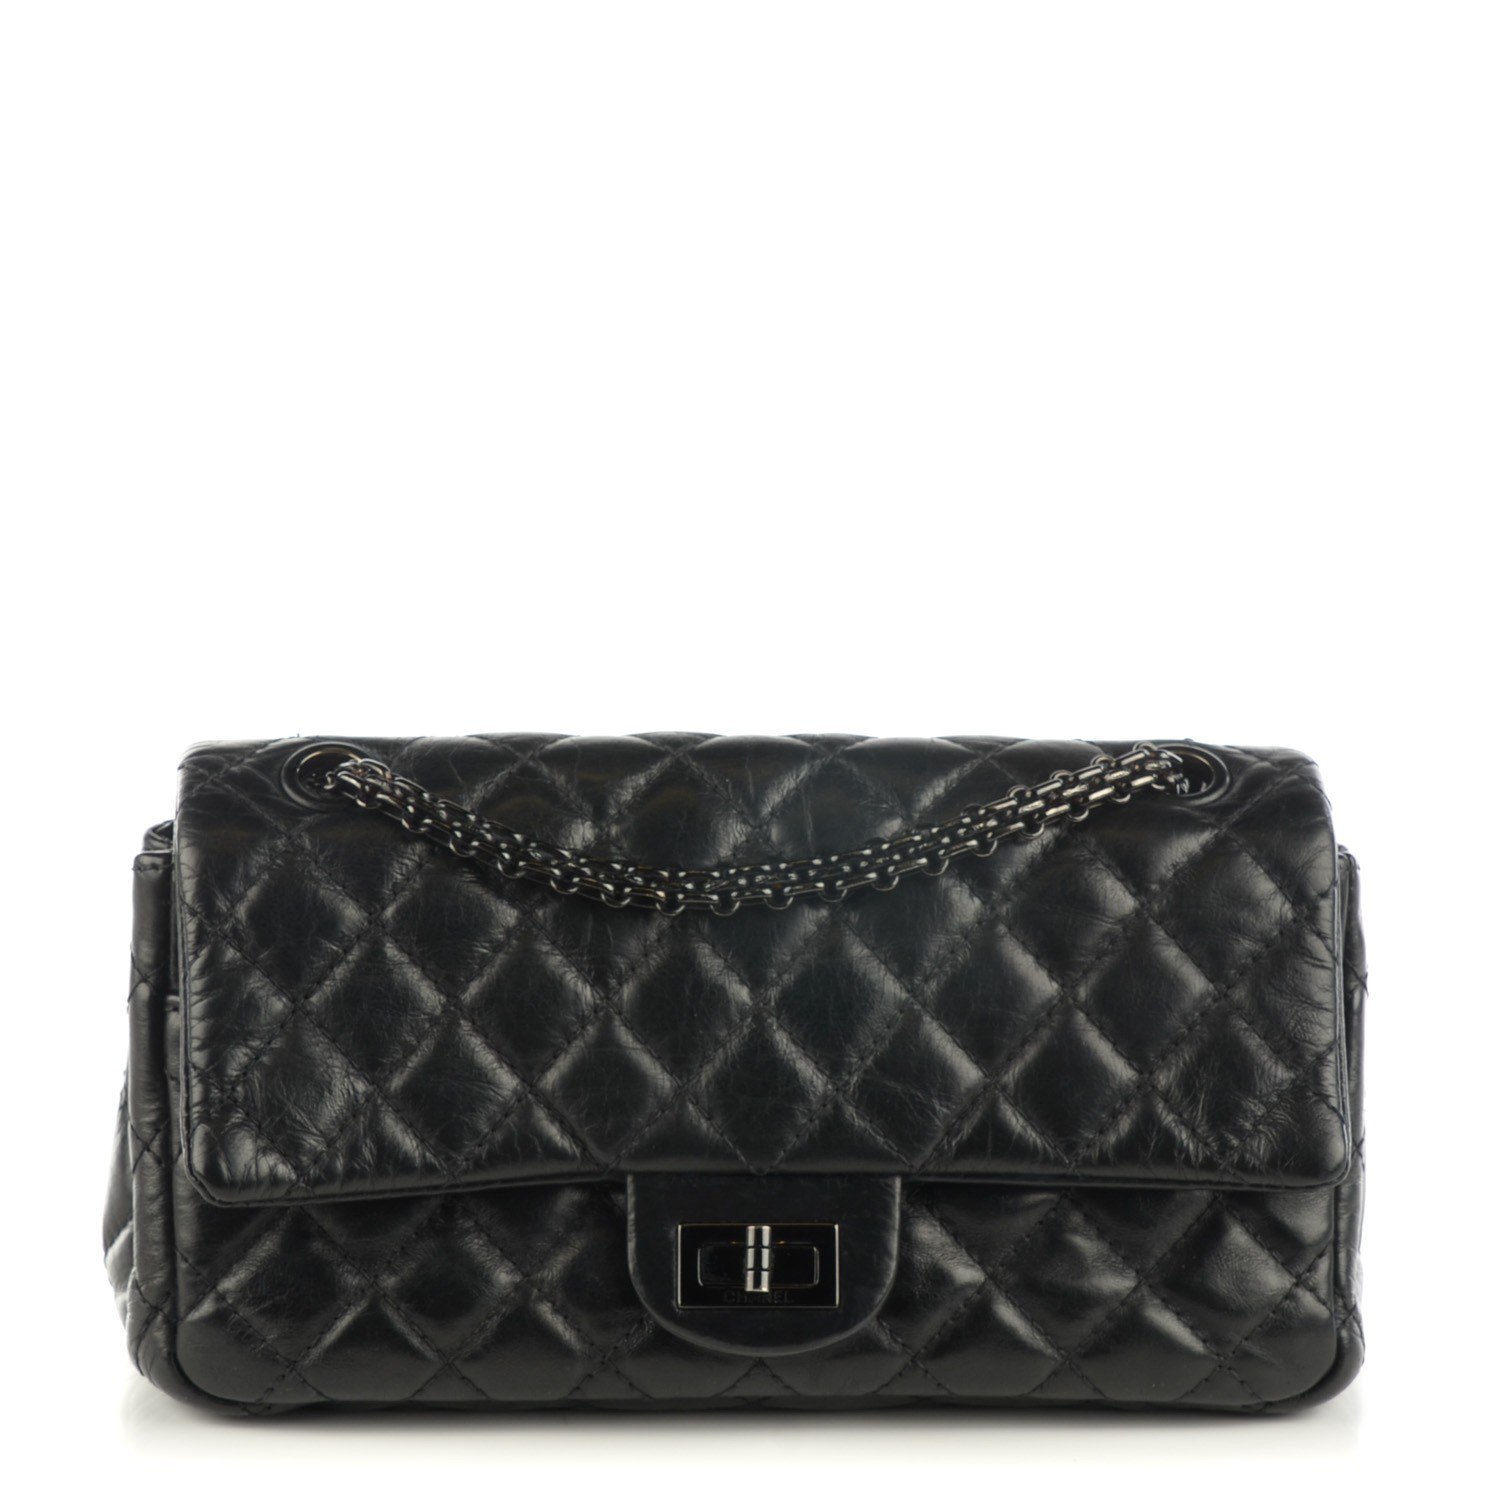 CHANEL Aged Calfskin Quilted Accordion Reissue 2.55 Flap Black 127082